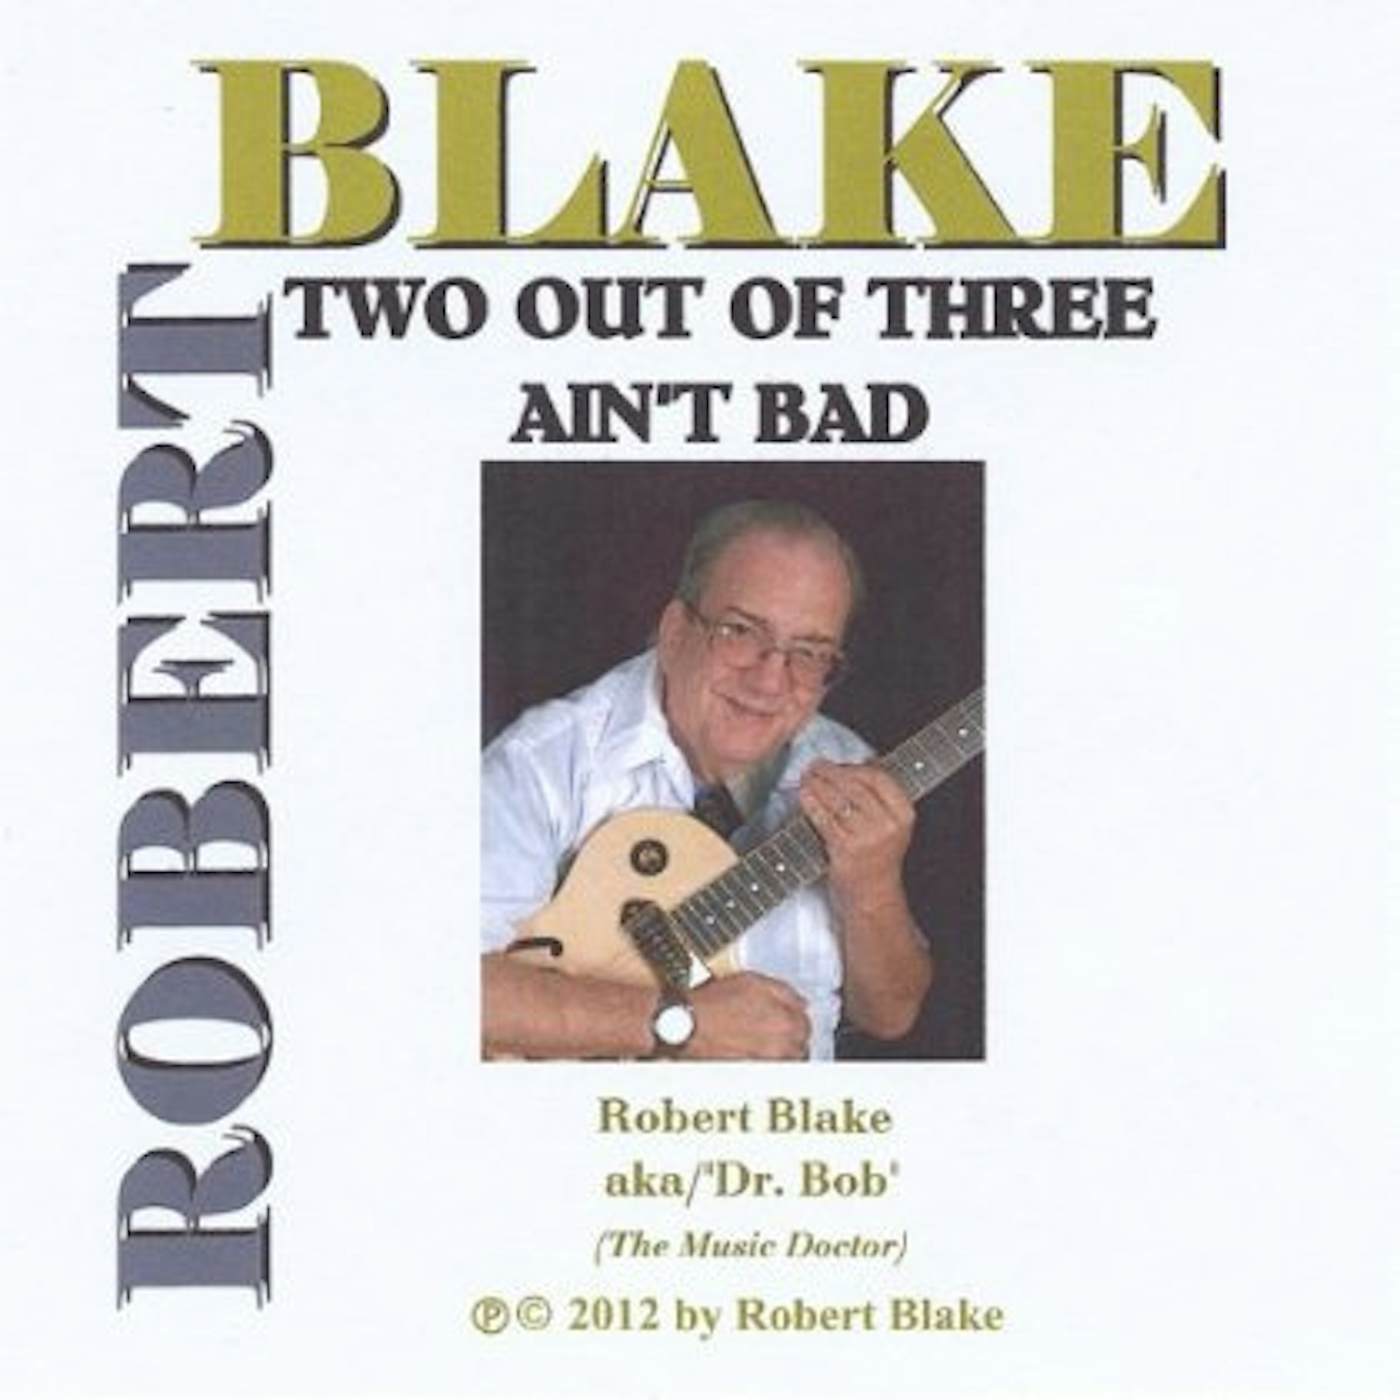 Robert Blake TWO OUT OF THREE AIN'T BAD CD